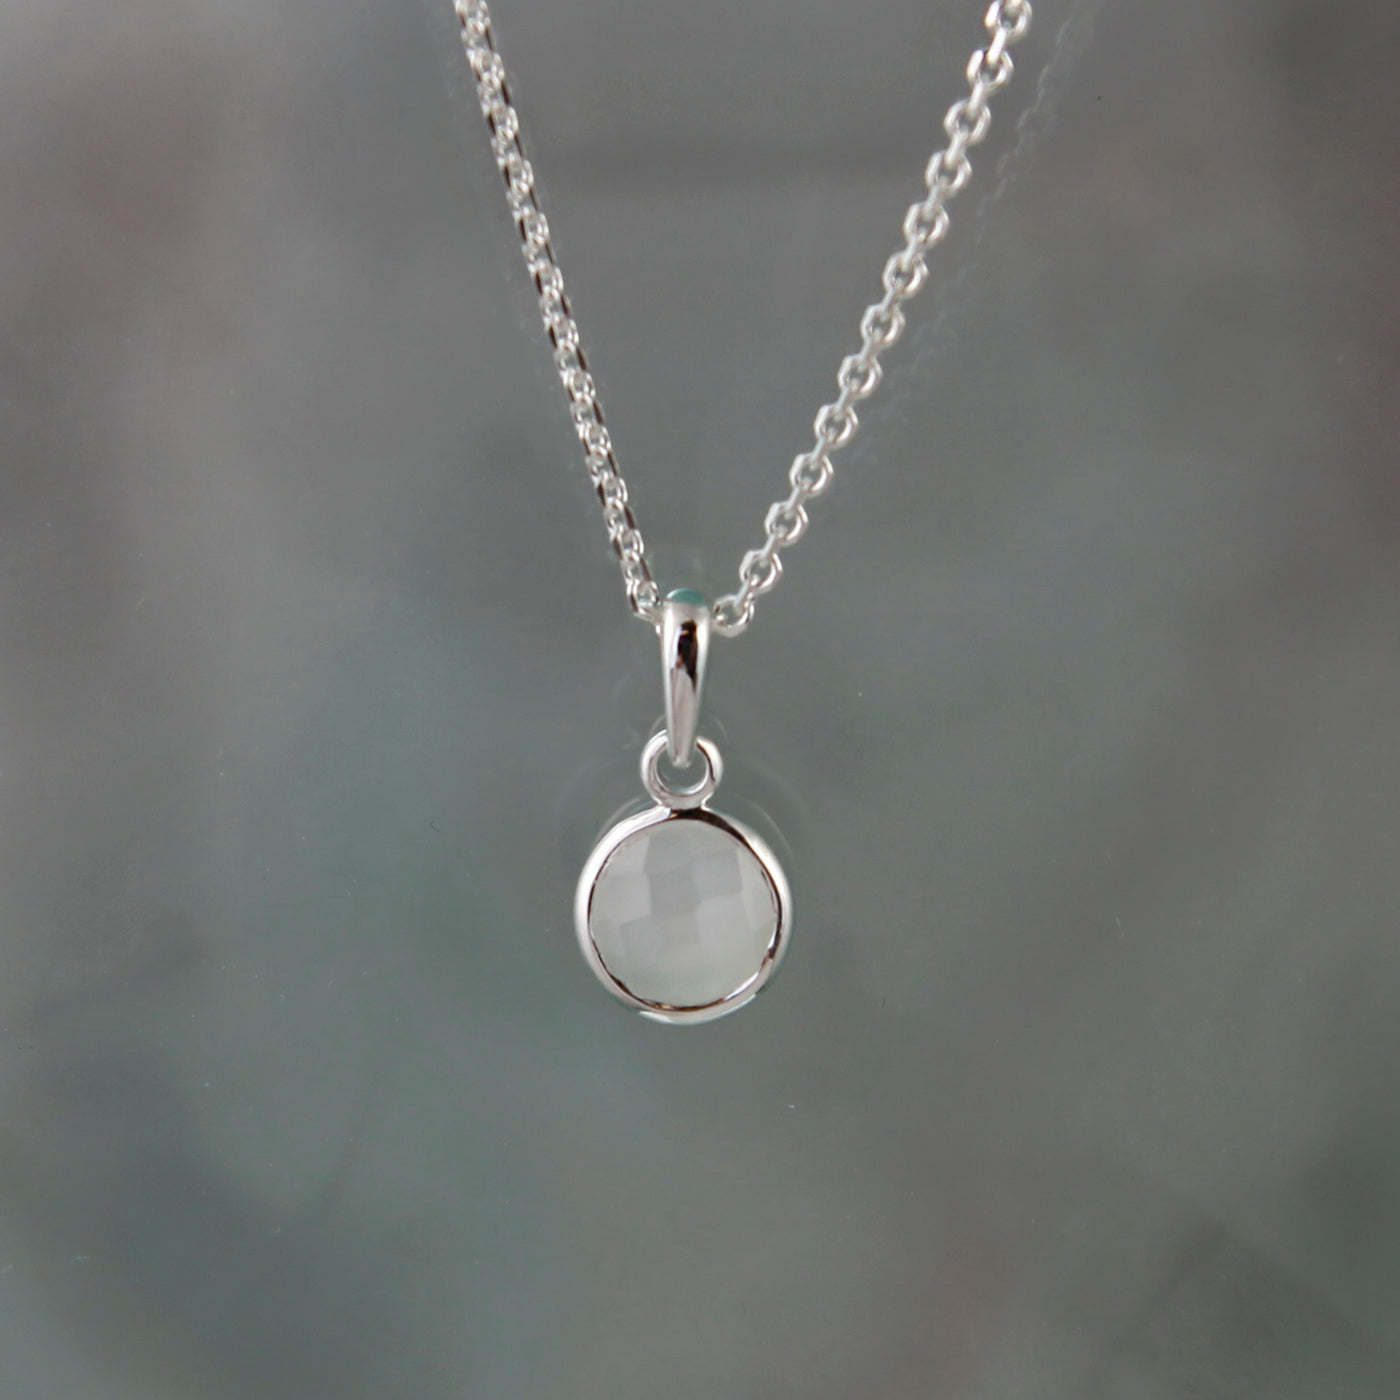 Staged Shot of Silver and Moonstone Maya Pendant